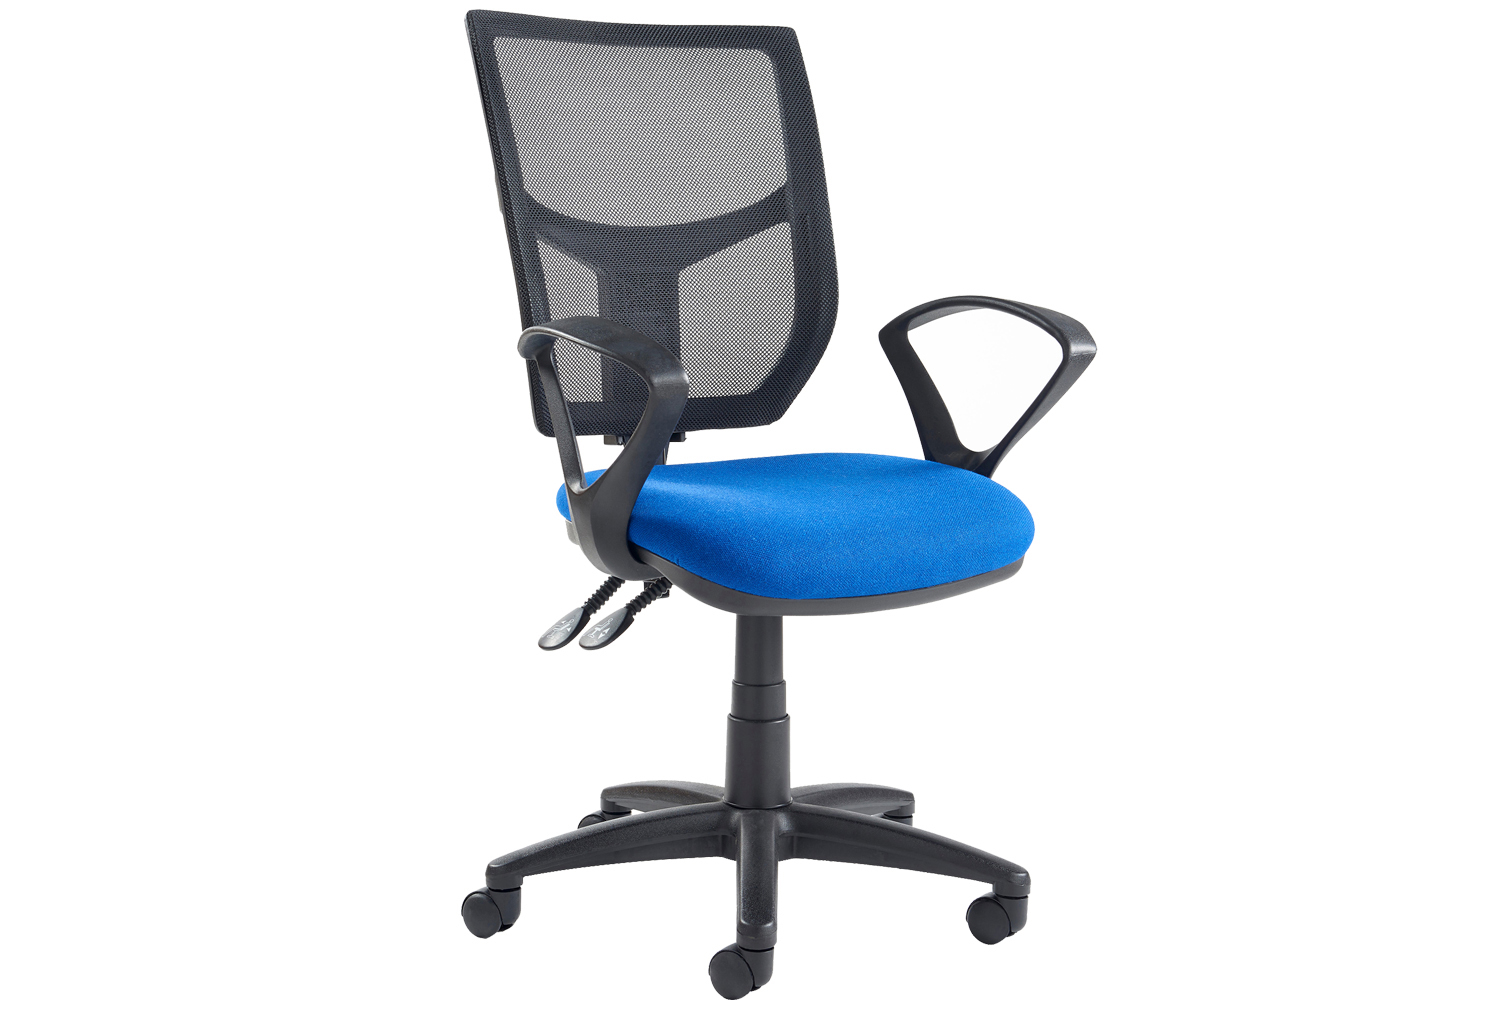 Gordy 3 Lever High Mesh Back Operator Office Chair With Fixed Arms, Havana